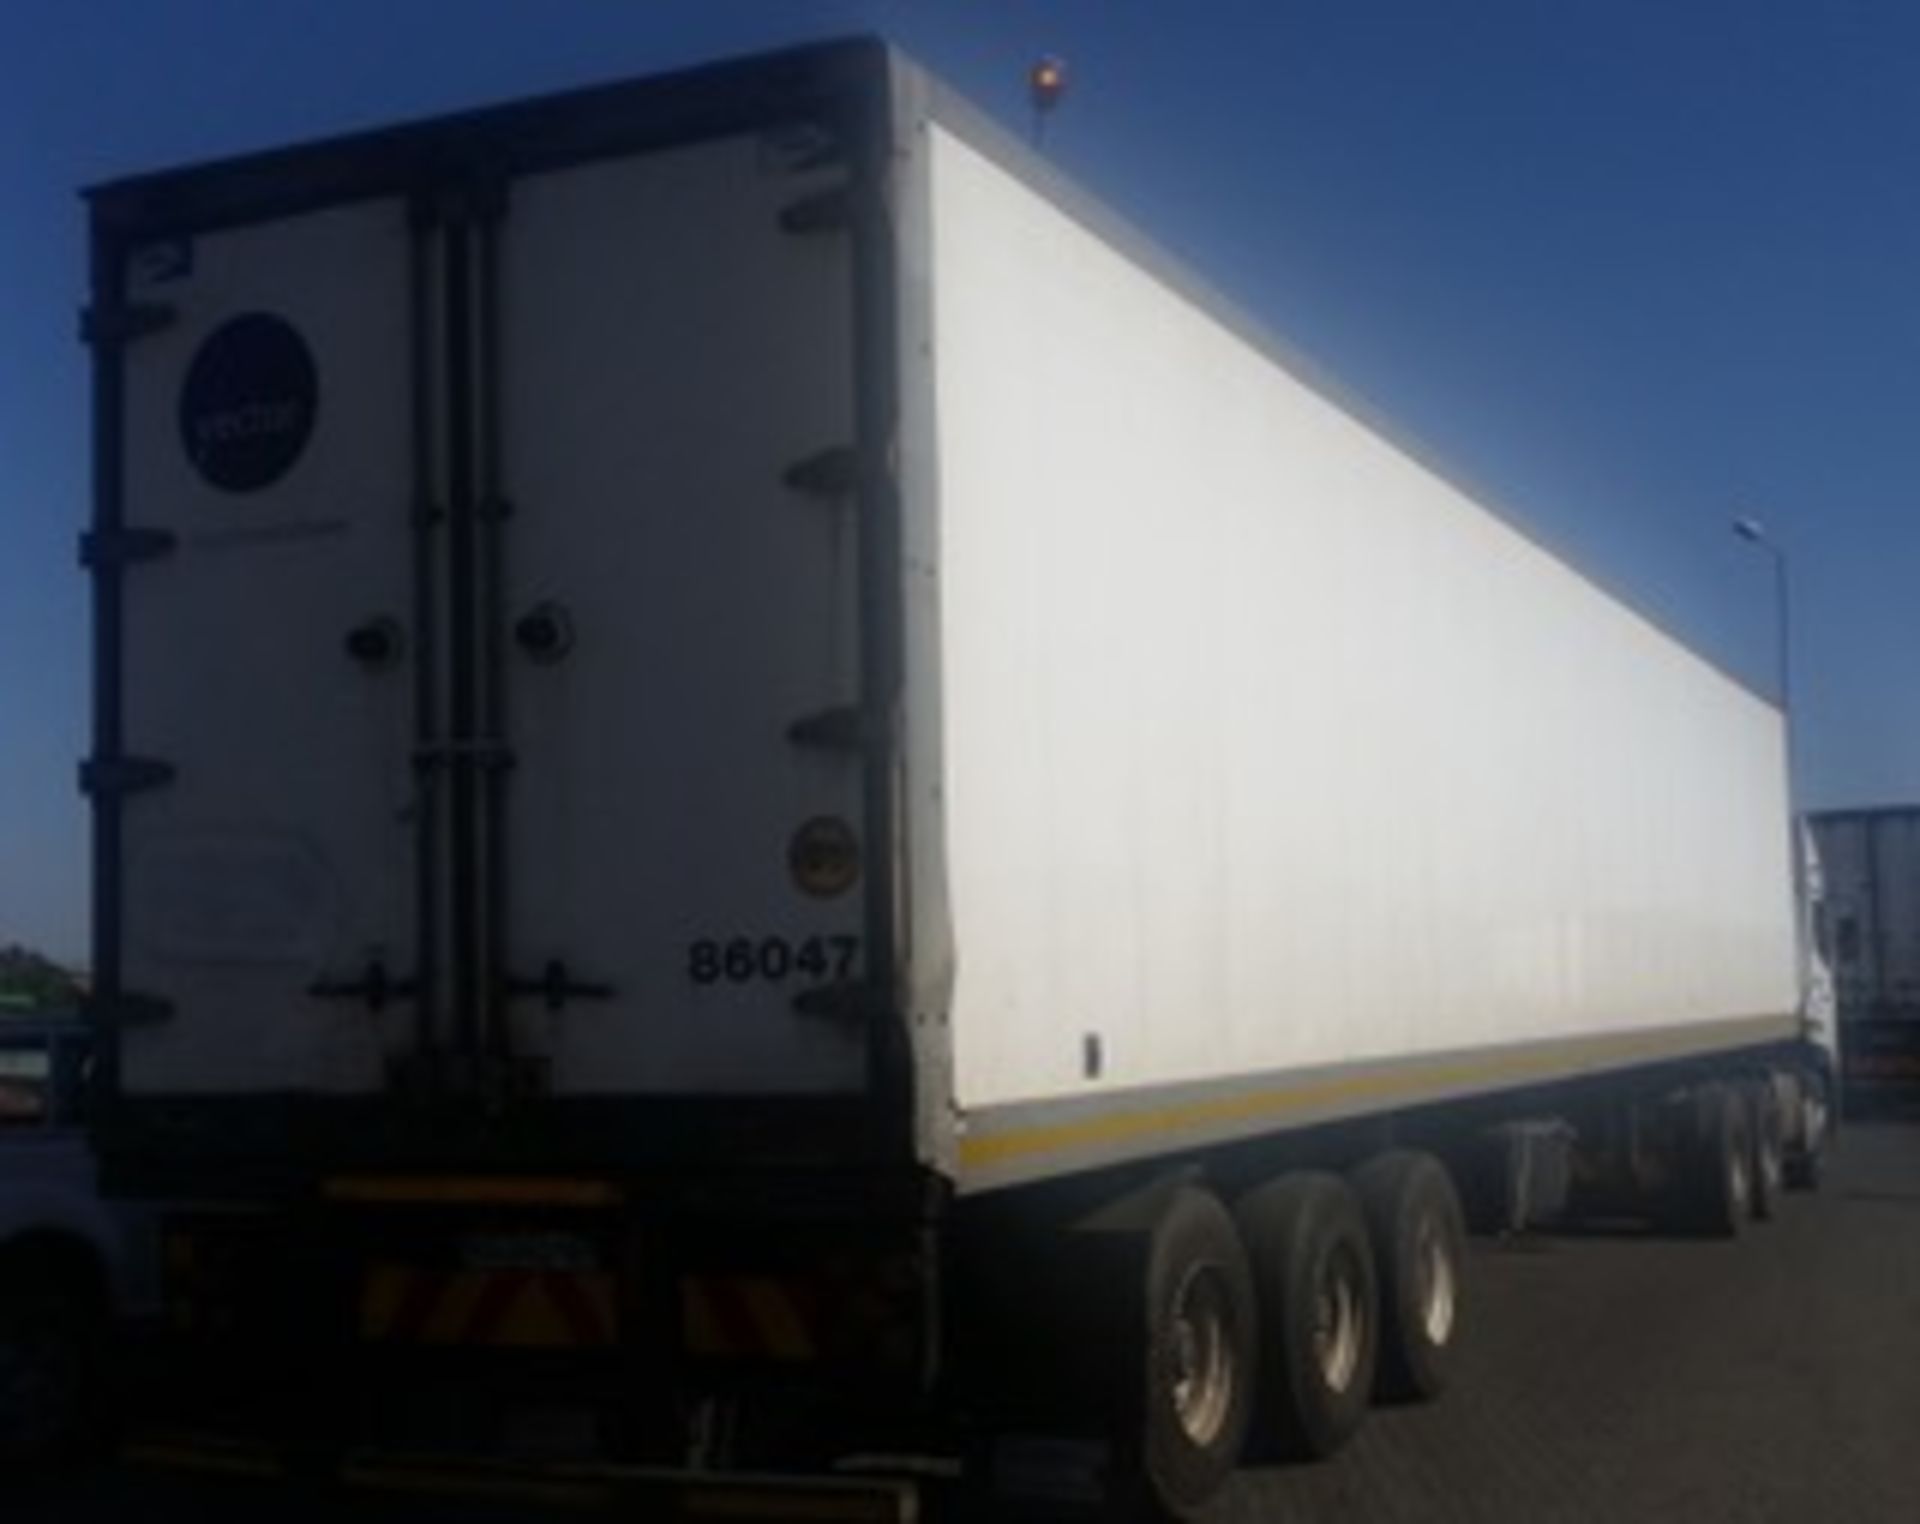 2007 CTS REFRIGERATED TRI-AXLE TRAILER - (86047) - LOCATION RUSTENBURG - Subject to Confirmation - Image 4 of 5